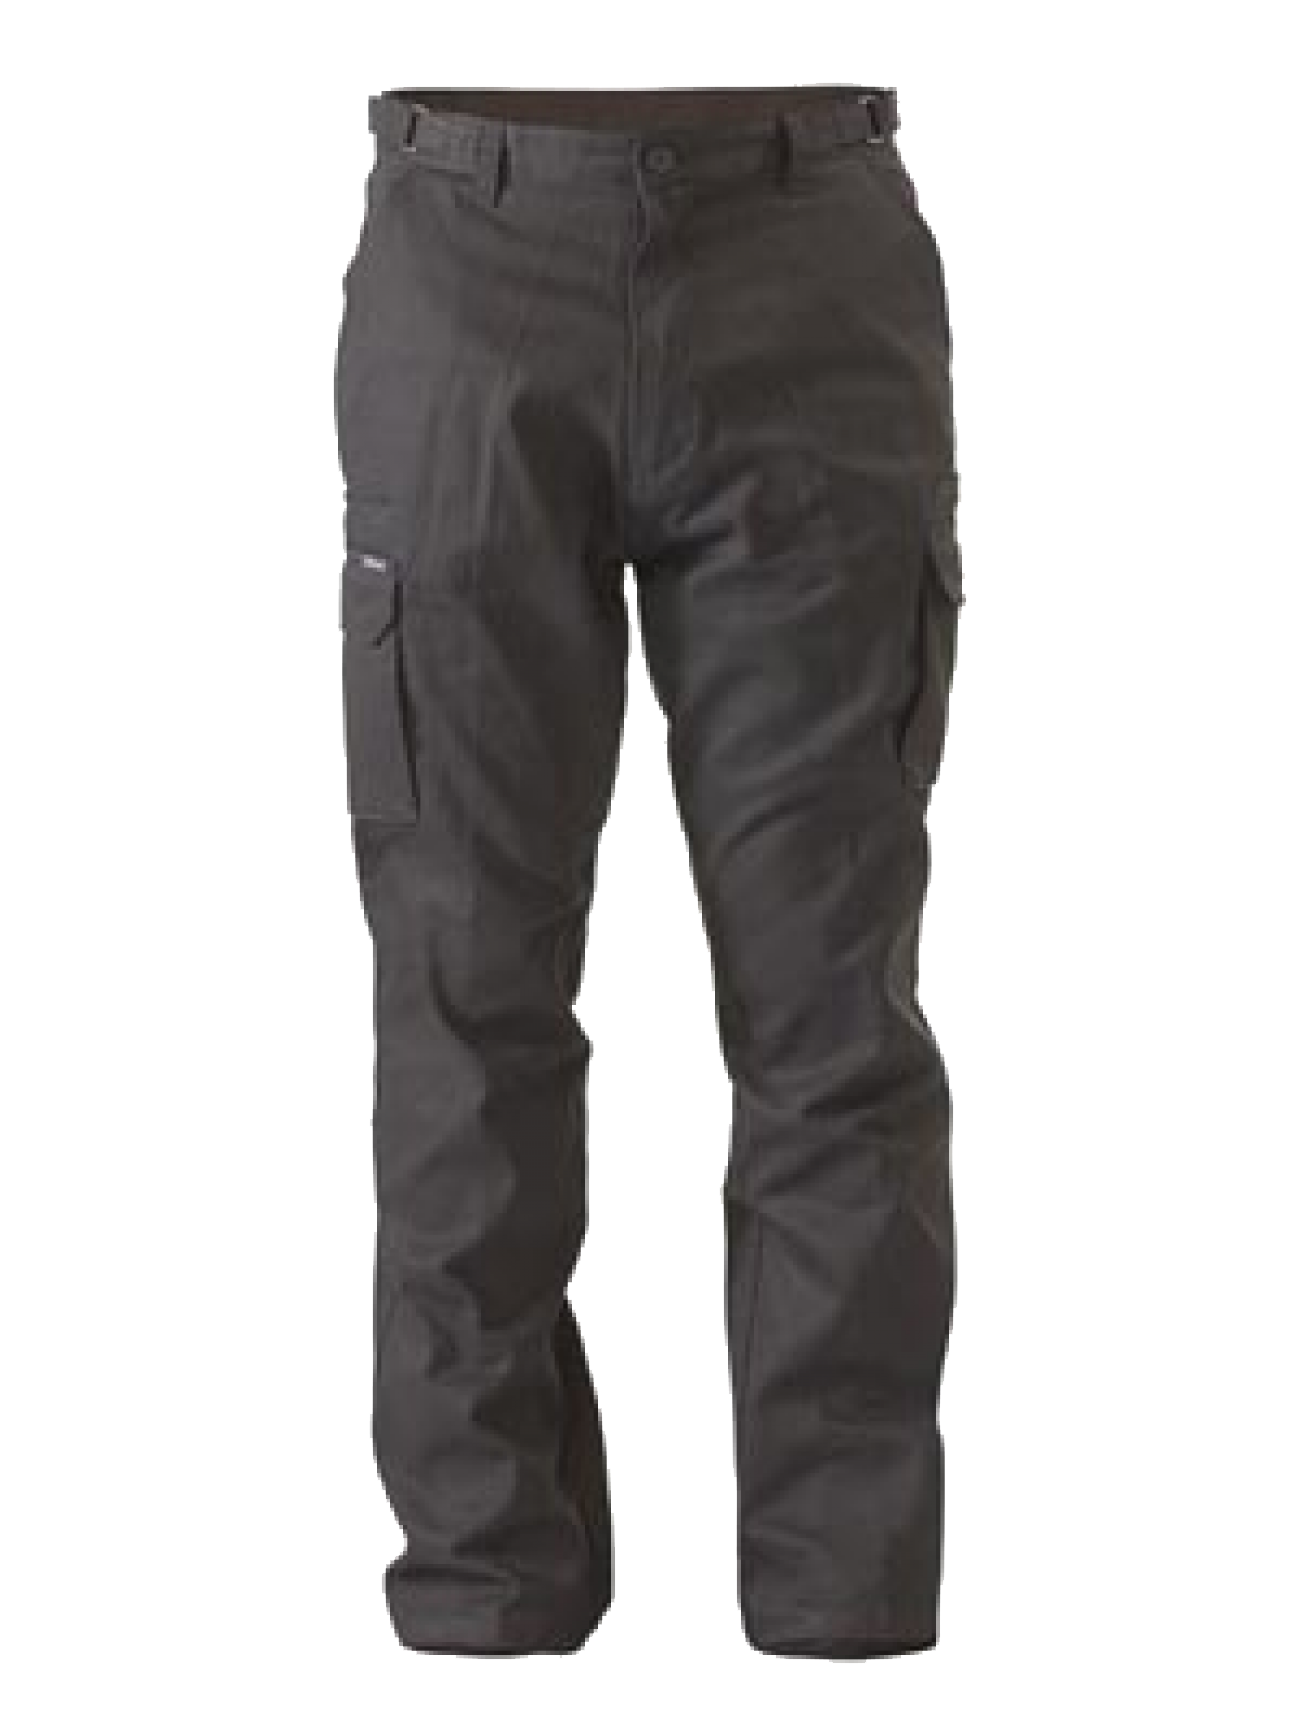 Cargo Pant Picture PNG Image